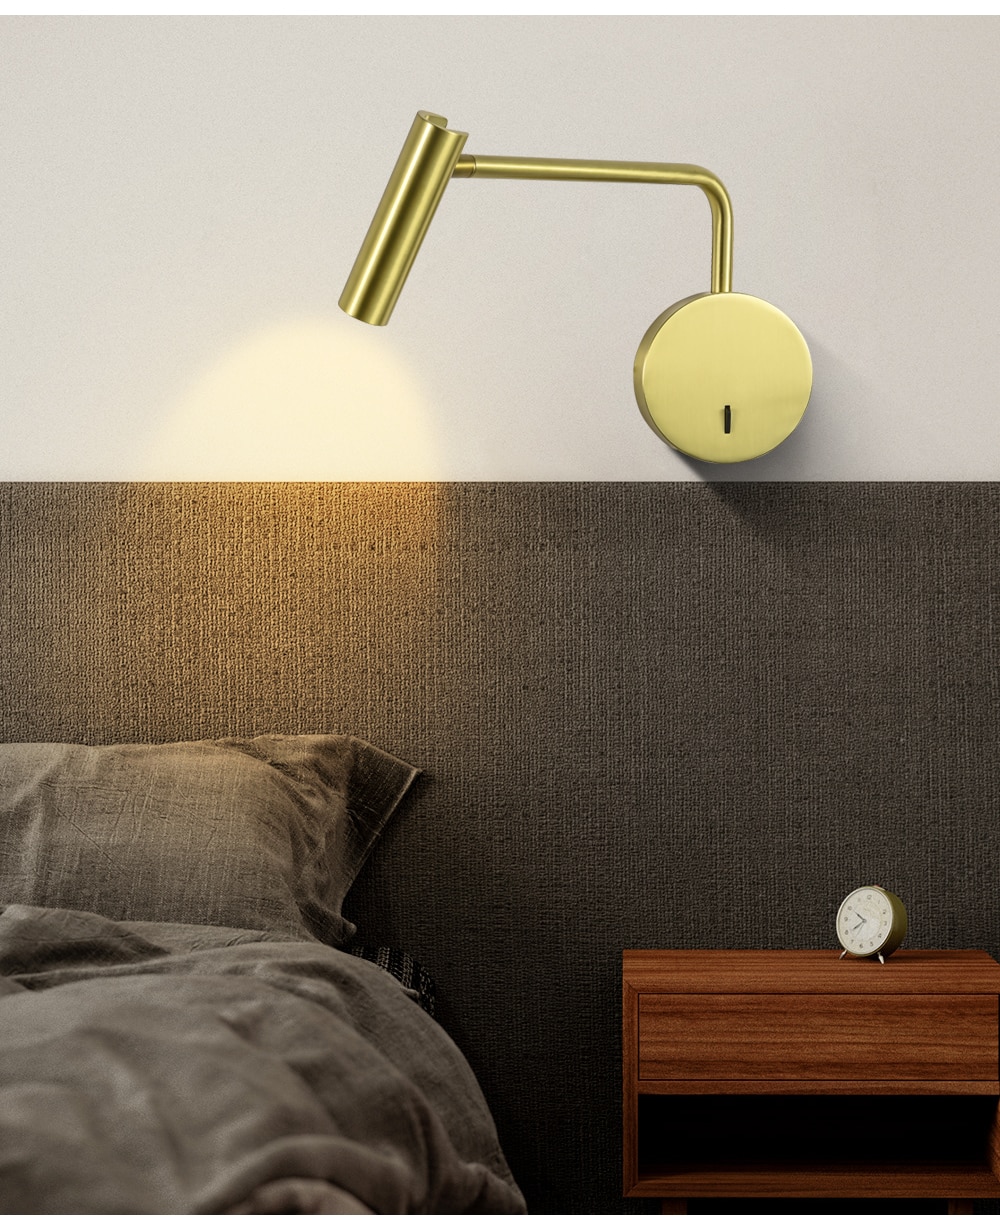 ZEROUNO led wall lights wall lamp arm swivel home modern decor bedroom switch LED 3W reading light bedside indoor home interior